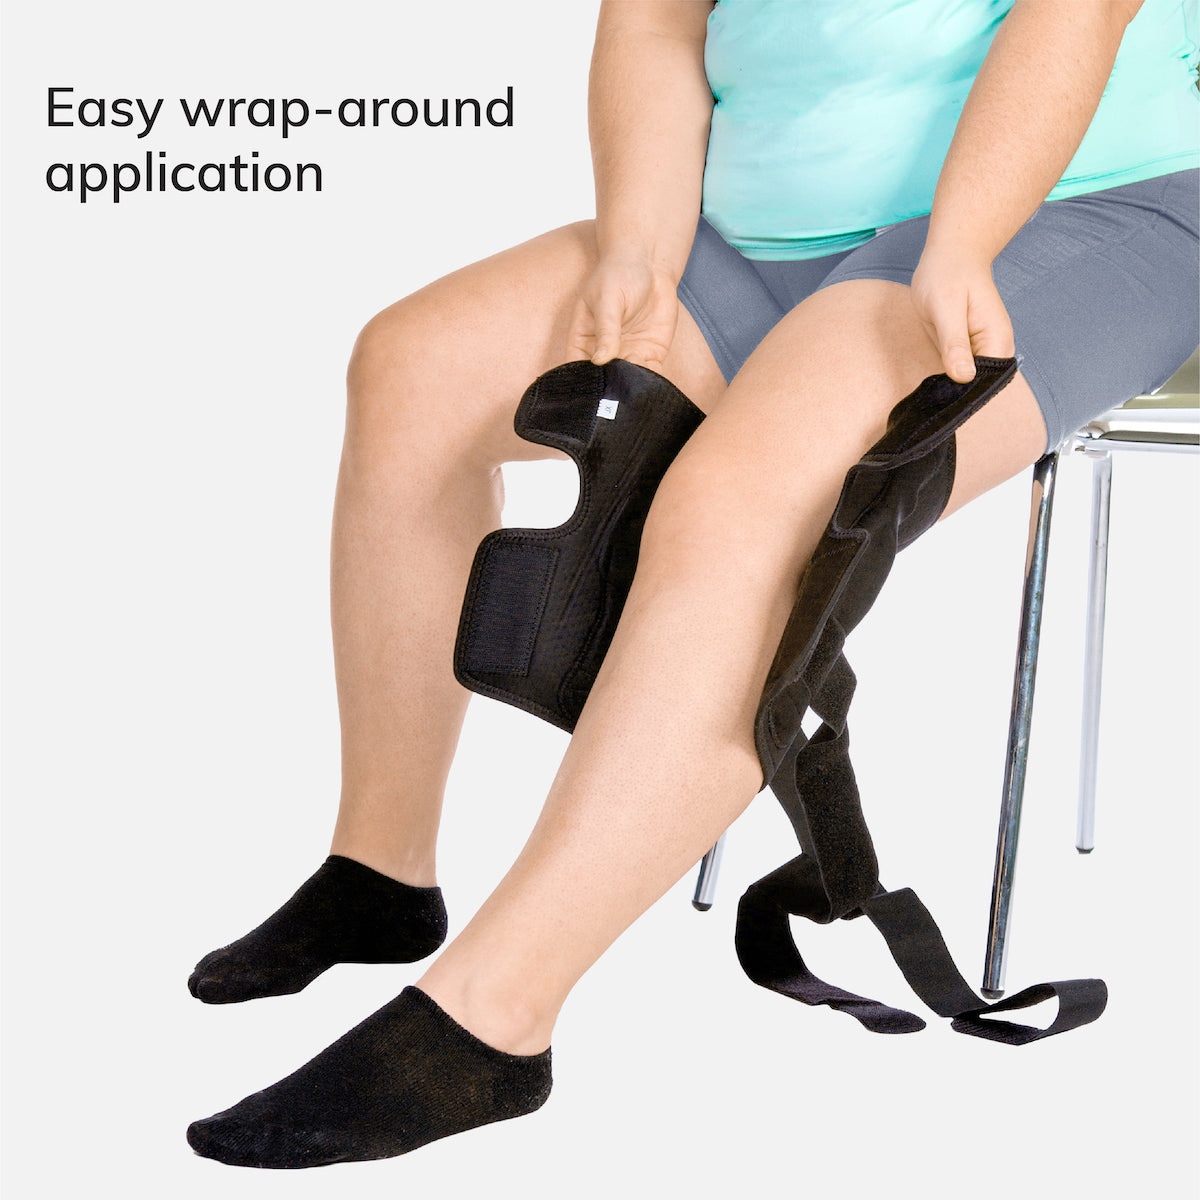 Wrap around application makes this an easy to apply hyperextended knee brace 